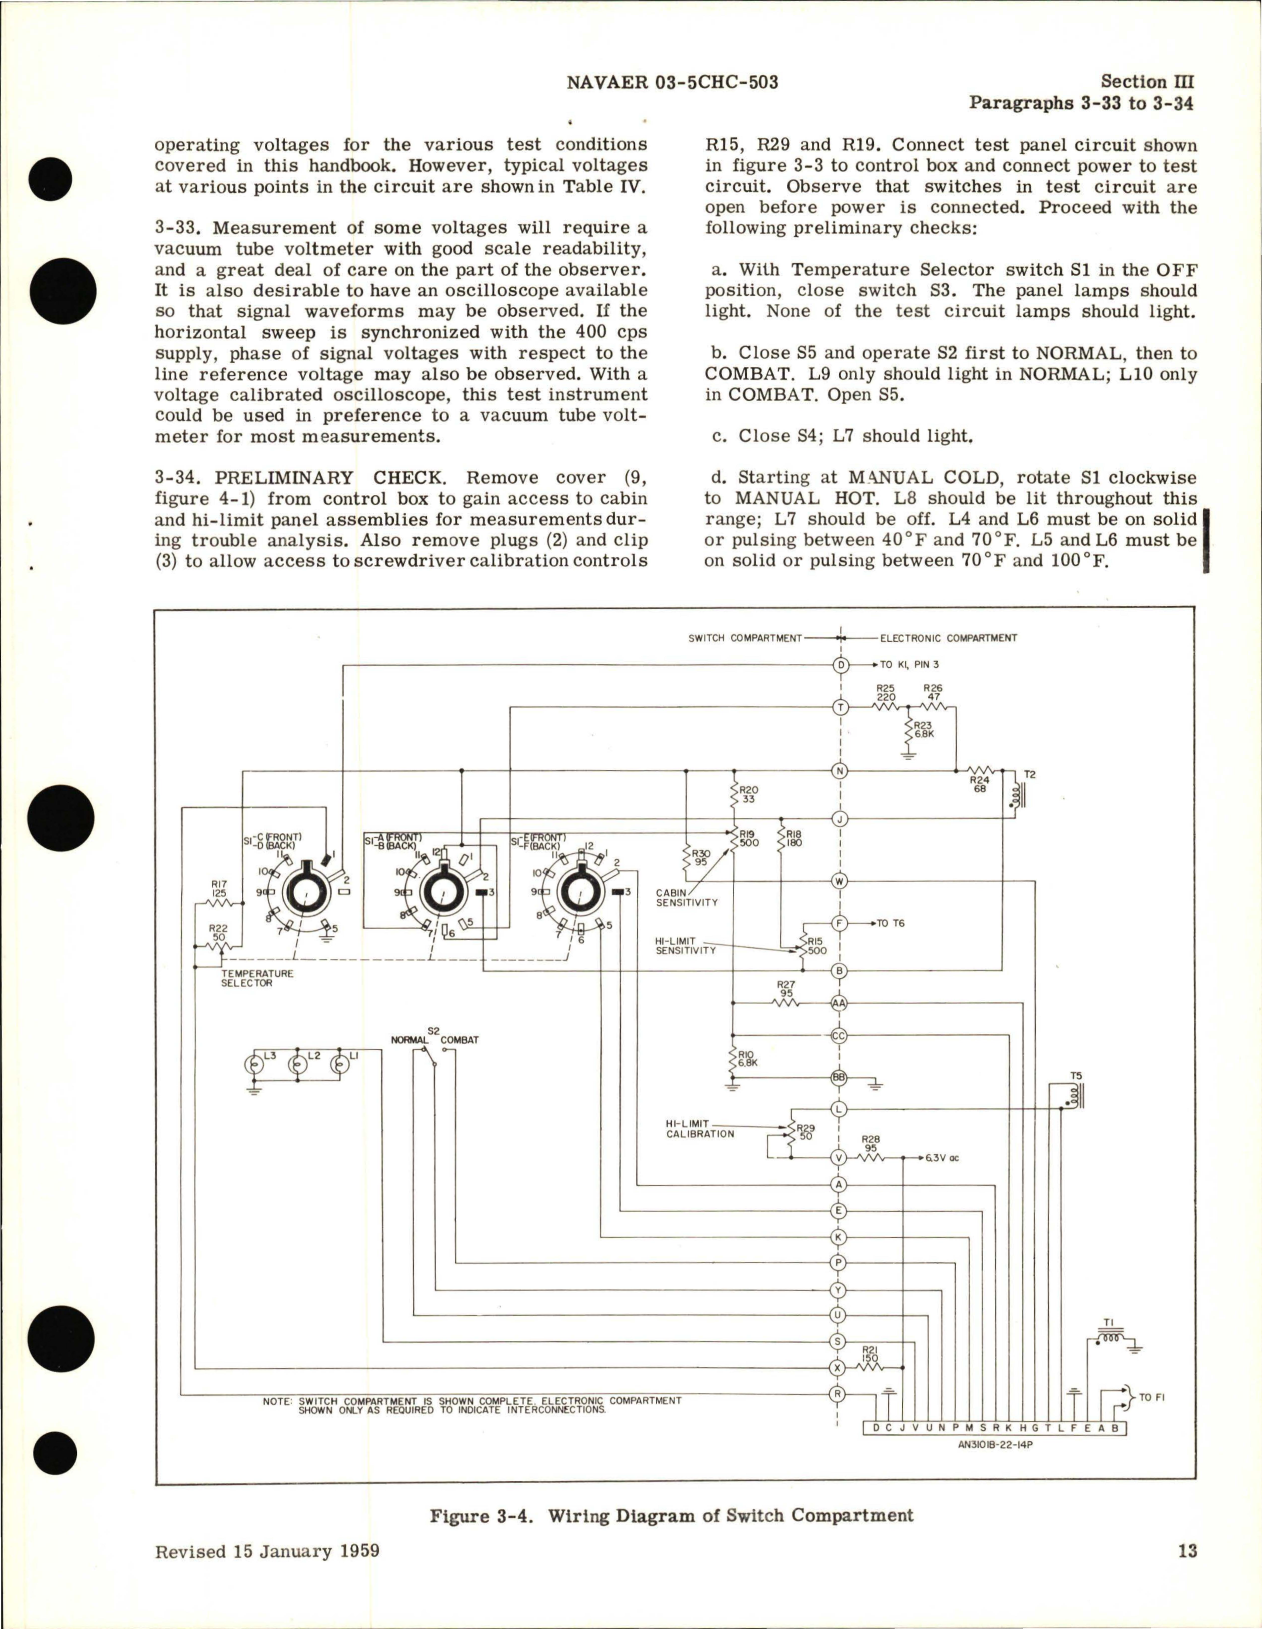 Sample page 7 from AirCorps Library document: Overhaul Instructions for Electronic Control Box - CYLZ 4807-1 and CYLZ 4807-2